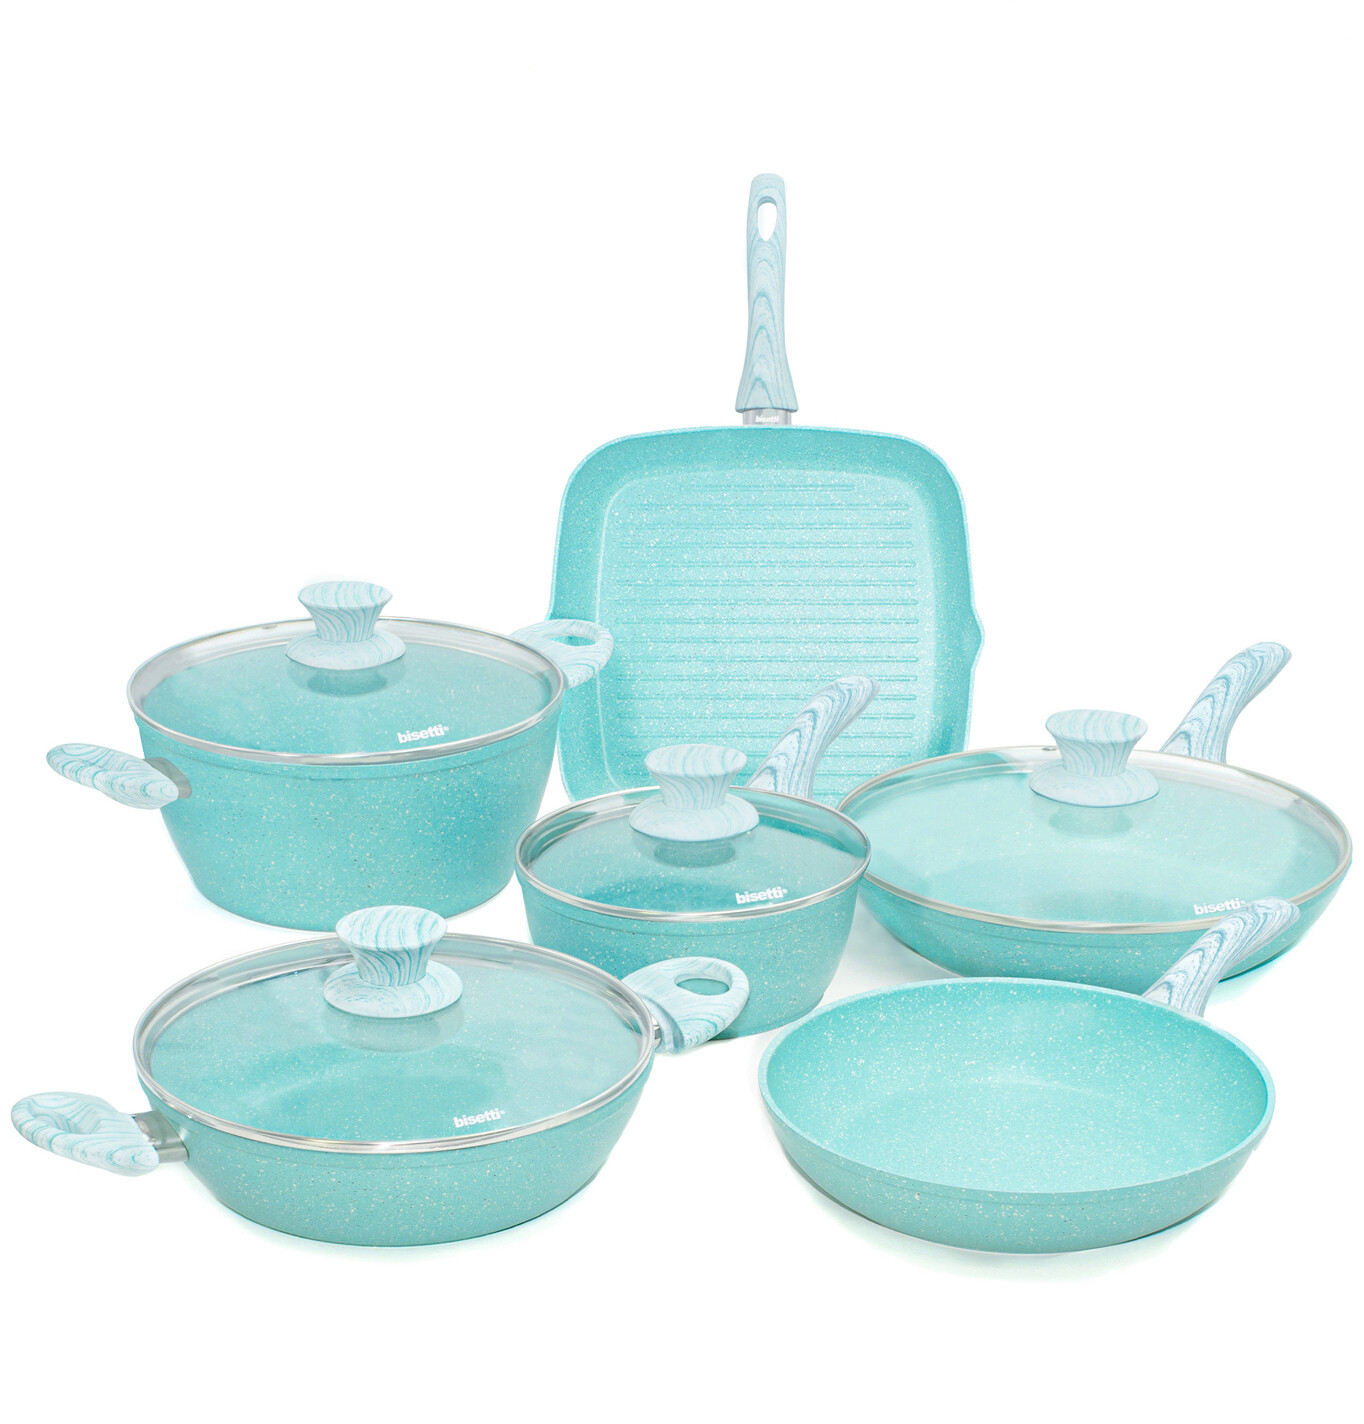 10 pieces cookware set 'Miss Gourmet' with turquoise wood colour handles